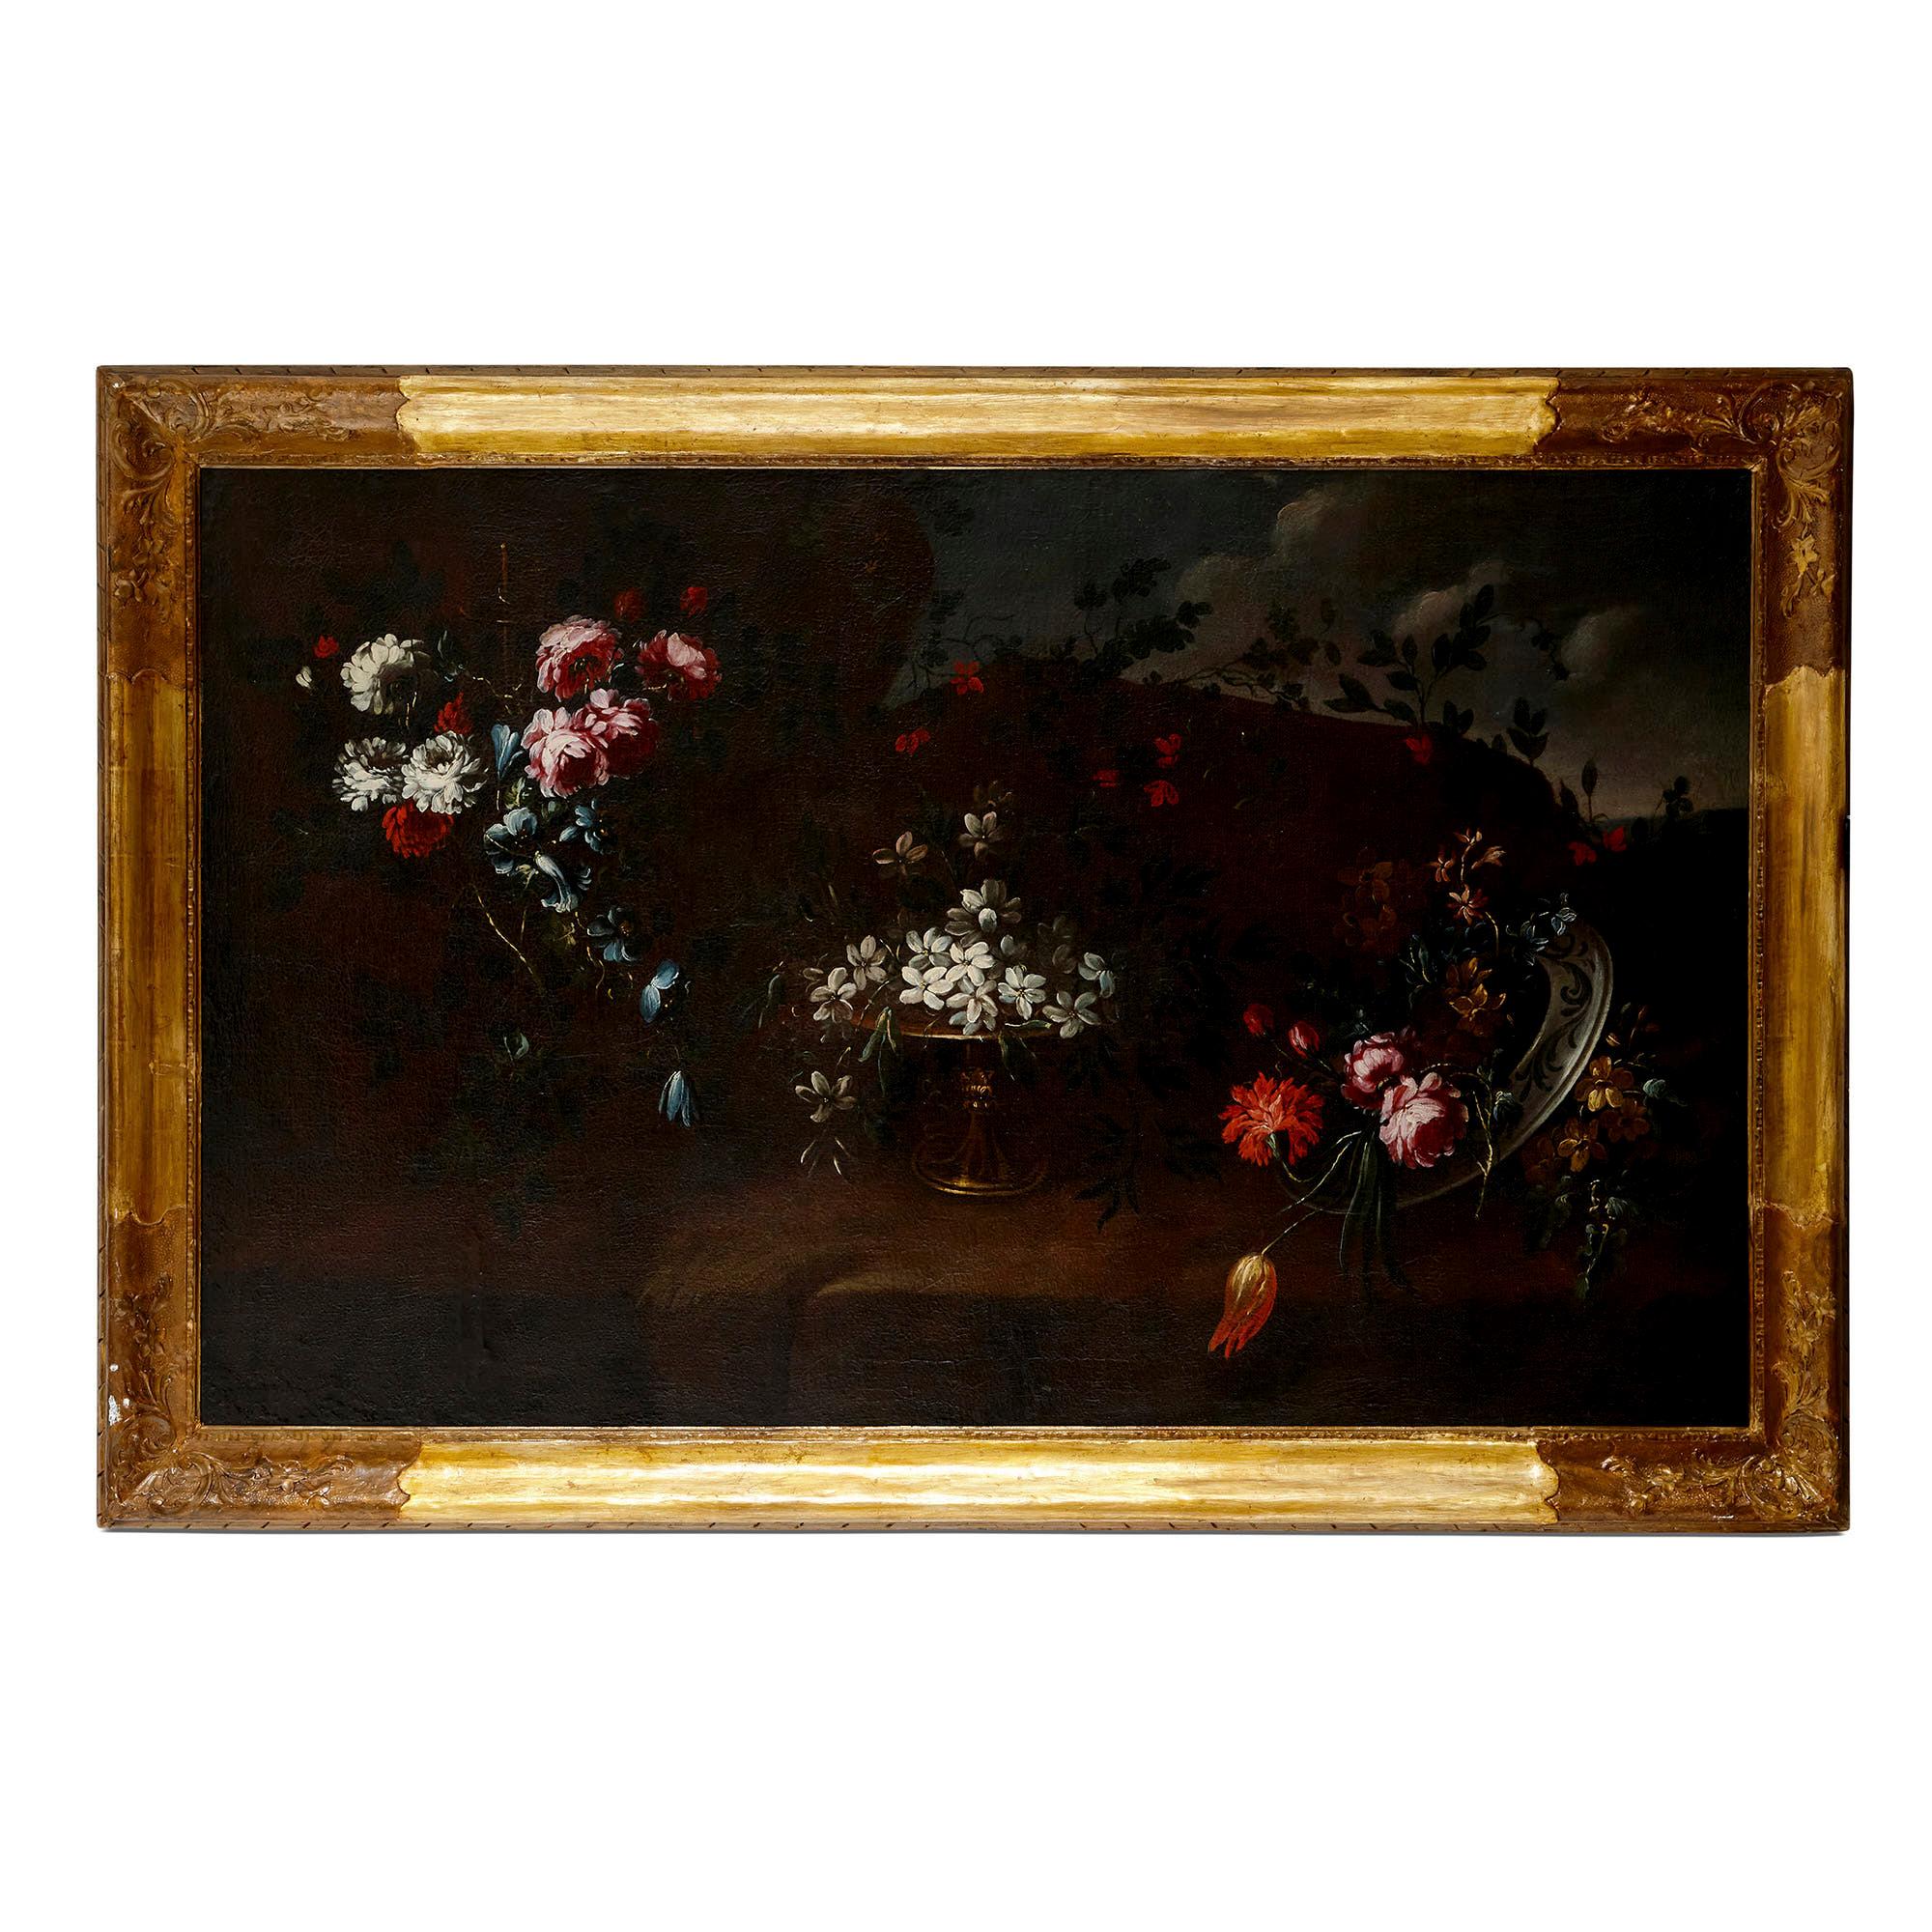 Pair of Antique 17th Century Floral Still Life Paintings, attr. Vincenzino - Black Landscape Painting by Giuseppe Vincenzino